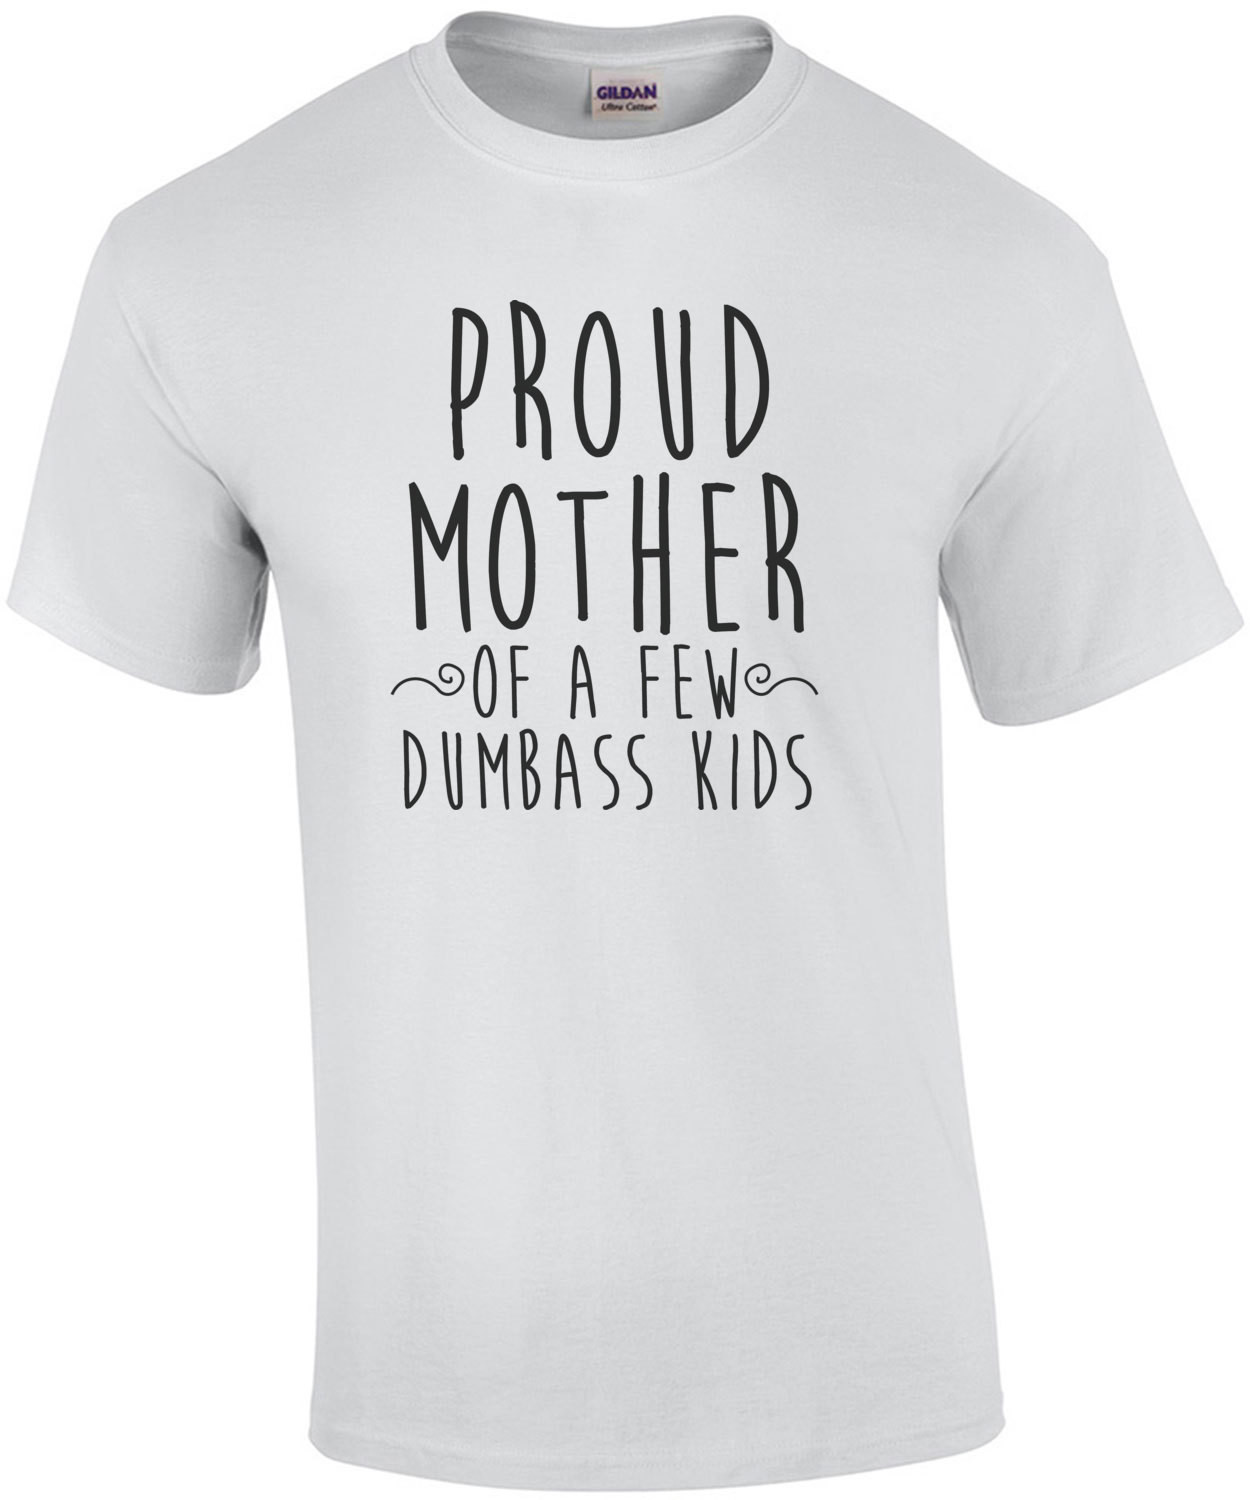 Proud Mother of a few dumbass kids - funny mom t-shirt - mother's day t-shirt